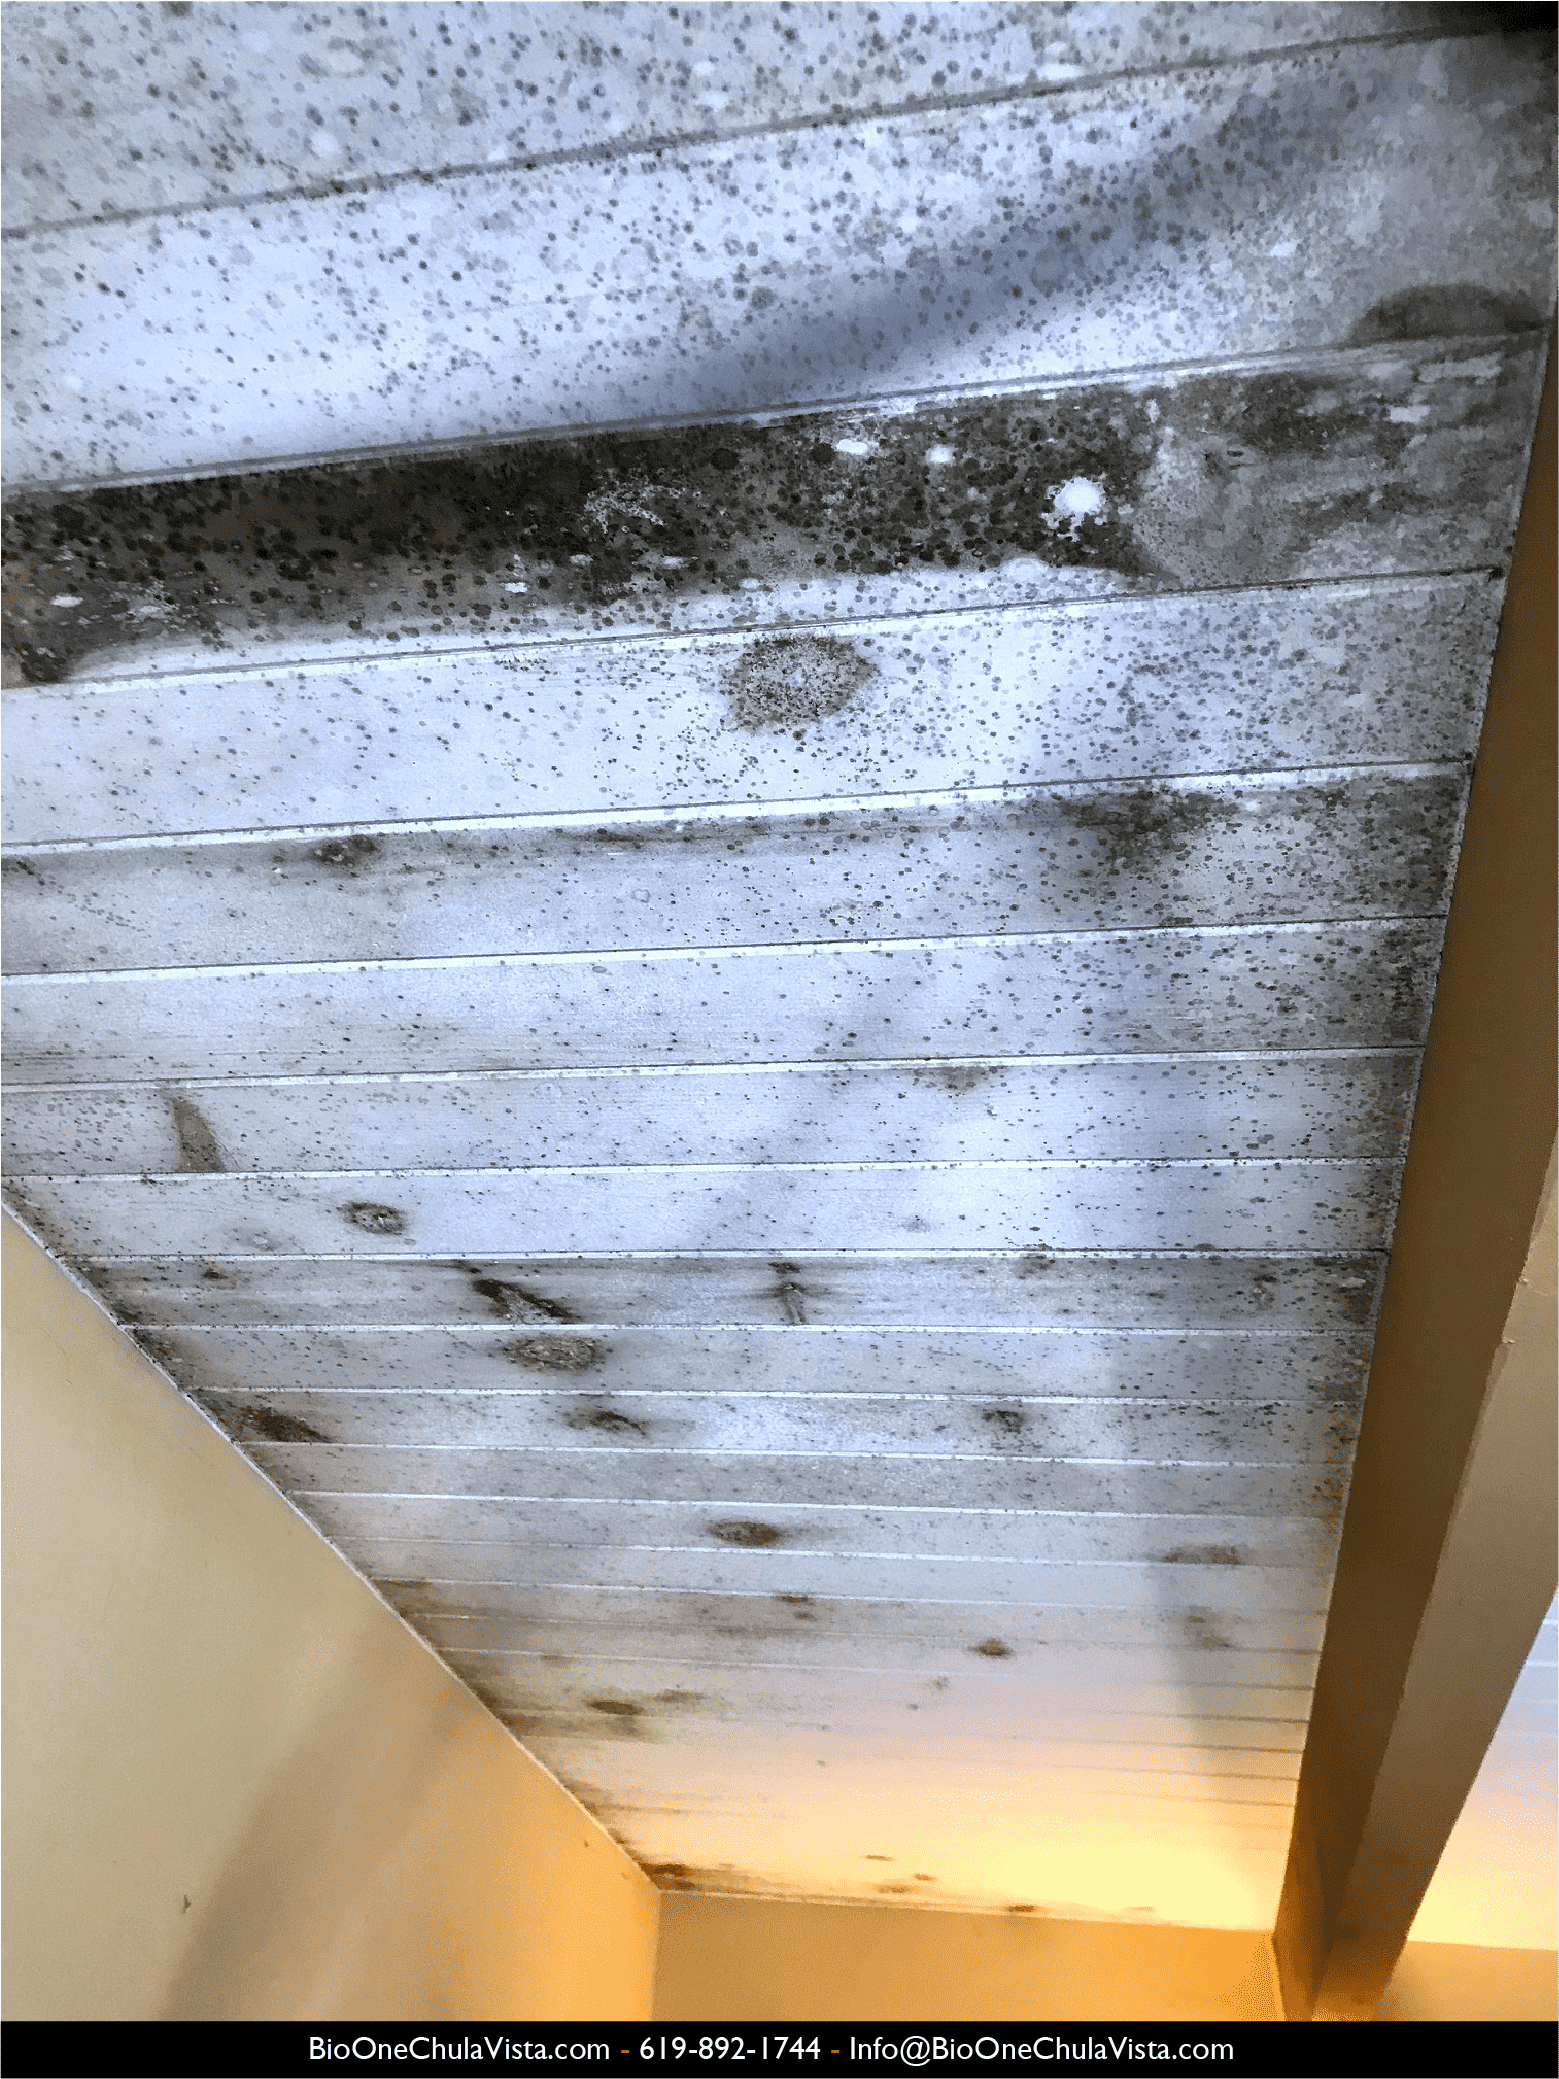 Image shows different angle of black mold in a bathroom ceiling.